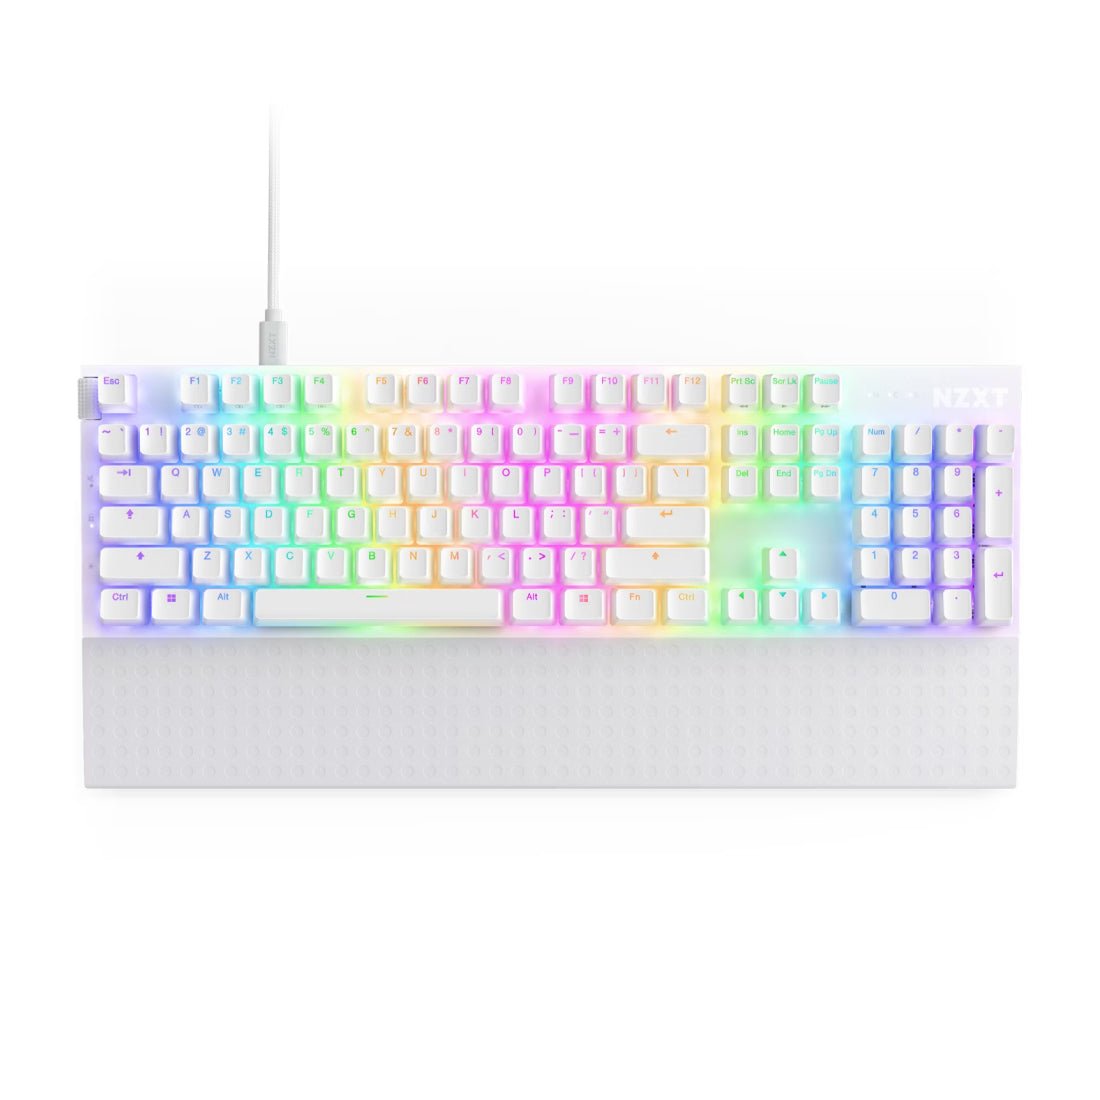 NZXT Function 2 Full Size RGB Wired Mechanical Gaming Keyboard - Matte White - لوحة مفاتيح - Store 974 | ستور ٩٧٤